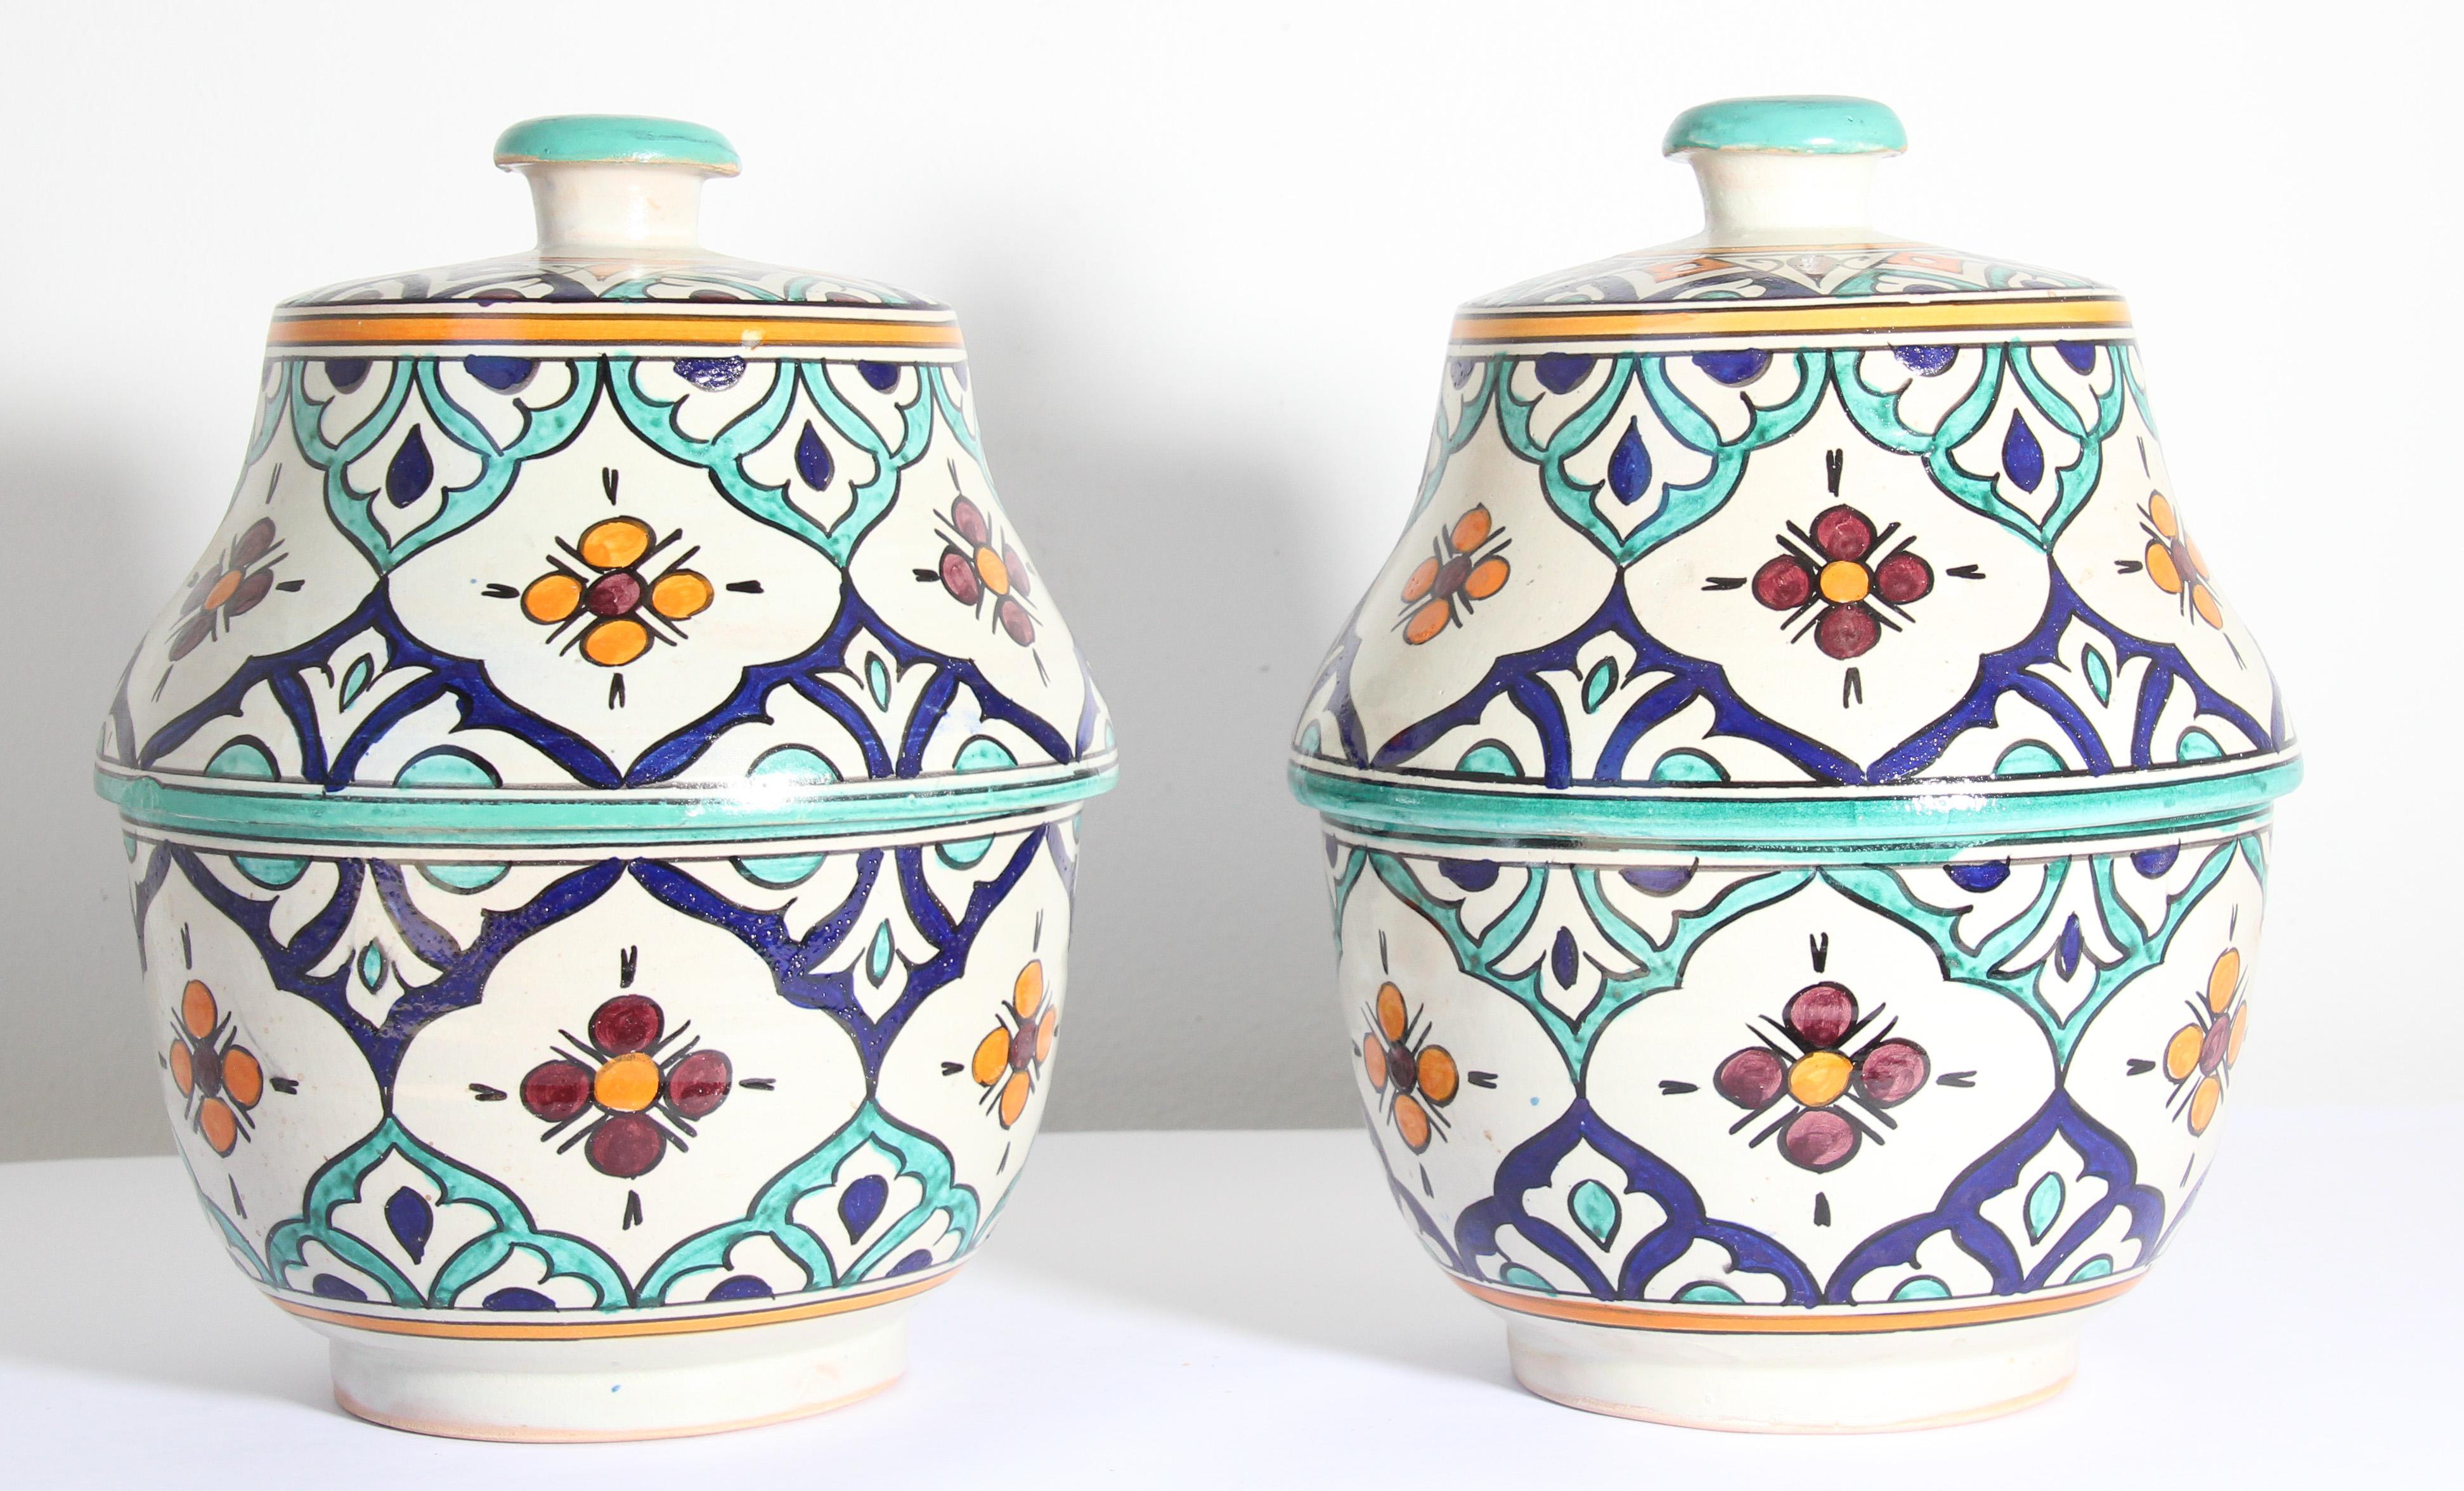 Moorish Ceramic Glazed Covered Urns Handcrafted in Fez Morocco In Good Condition For Sale In North Hollywood, CA